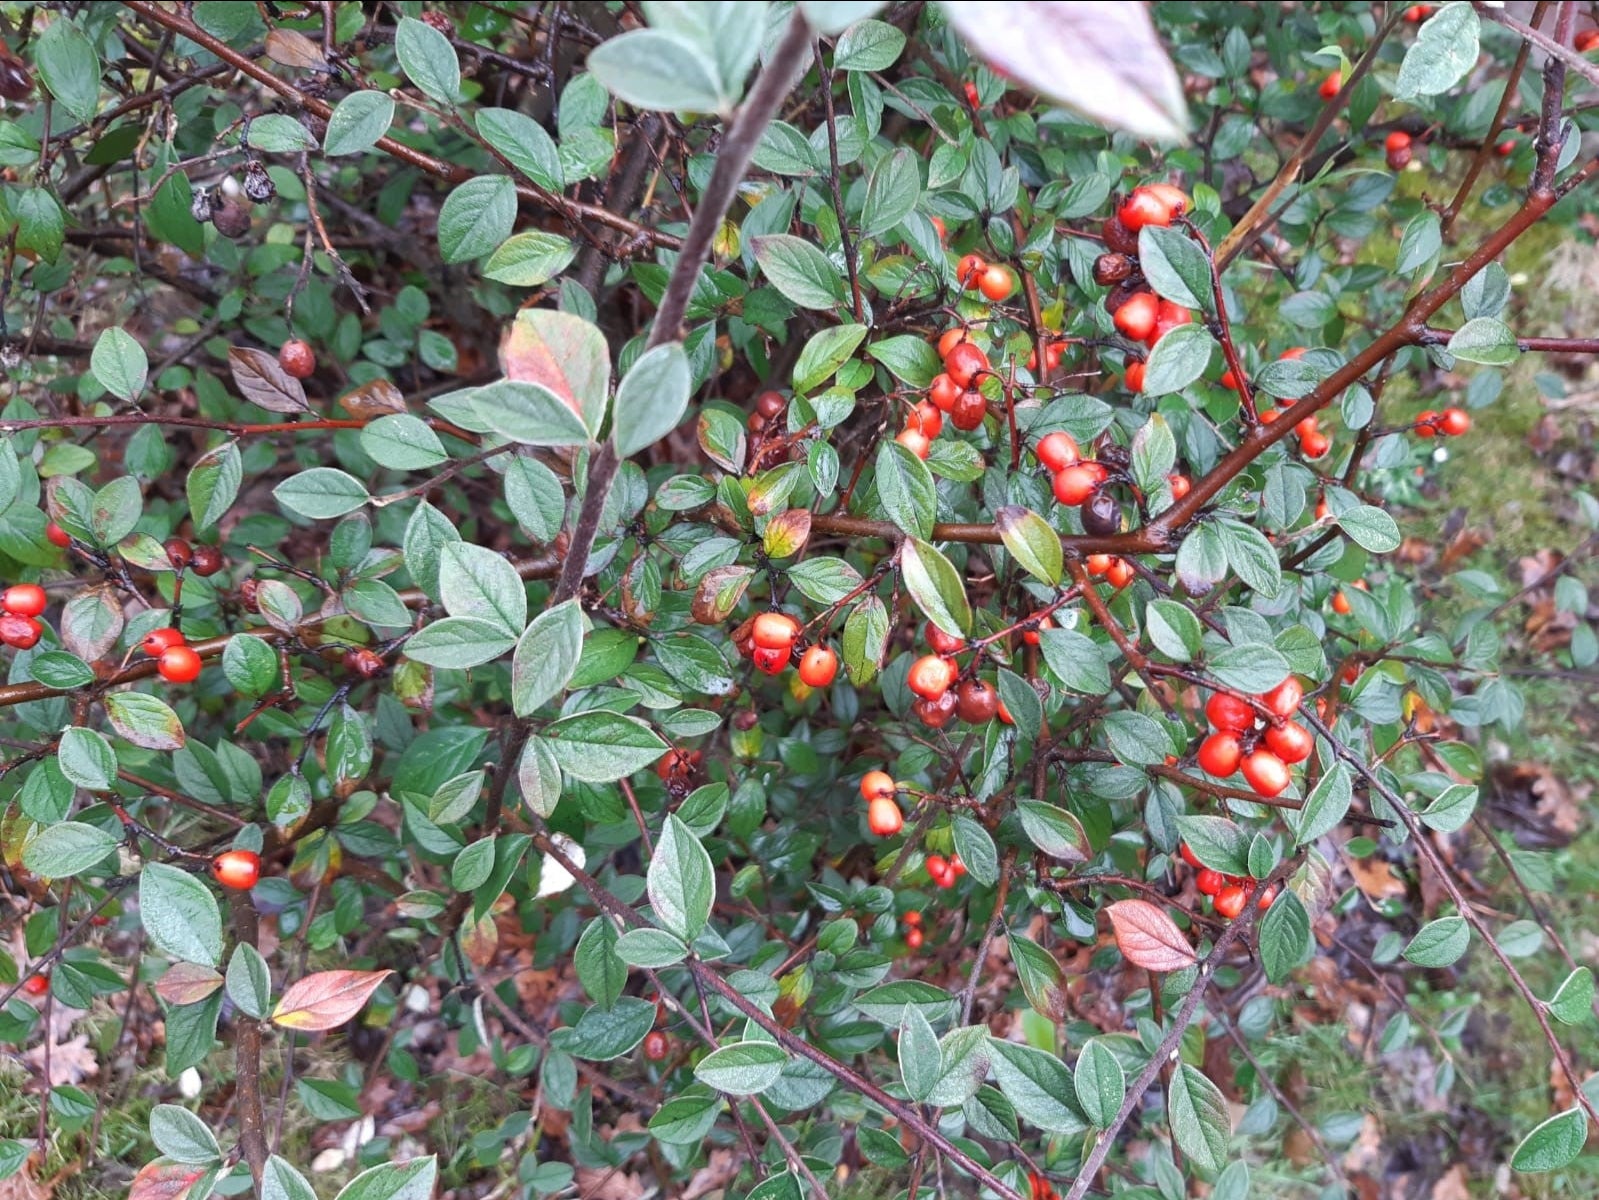 Scientists have discovered the cotoneaster “super plant” can help soak up pollution on busy roads